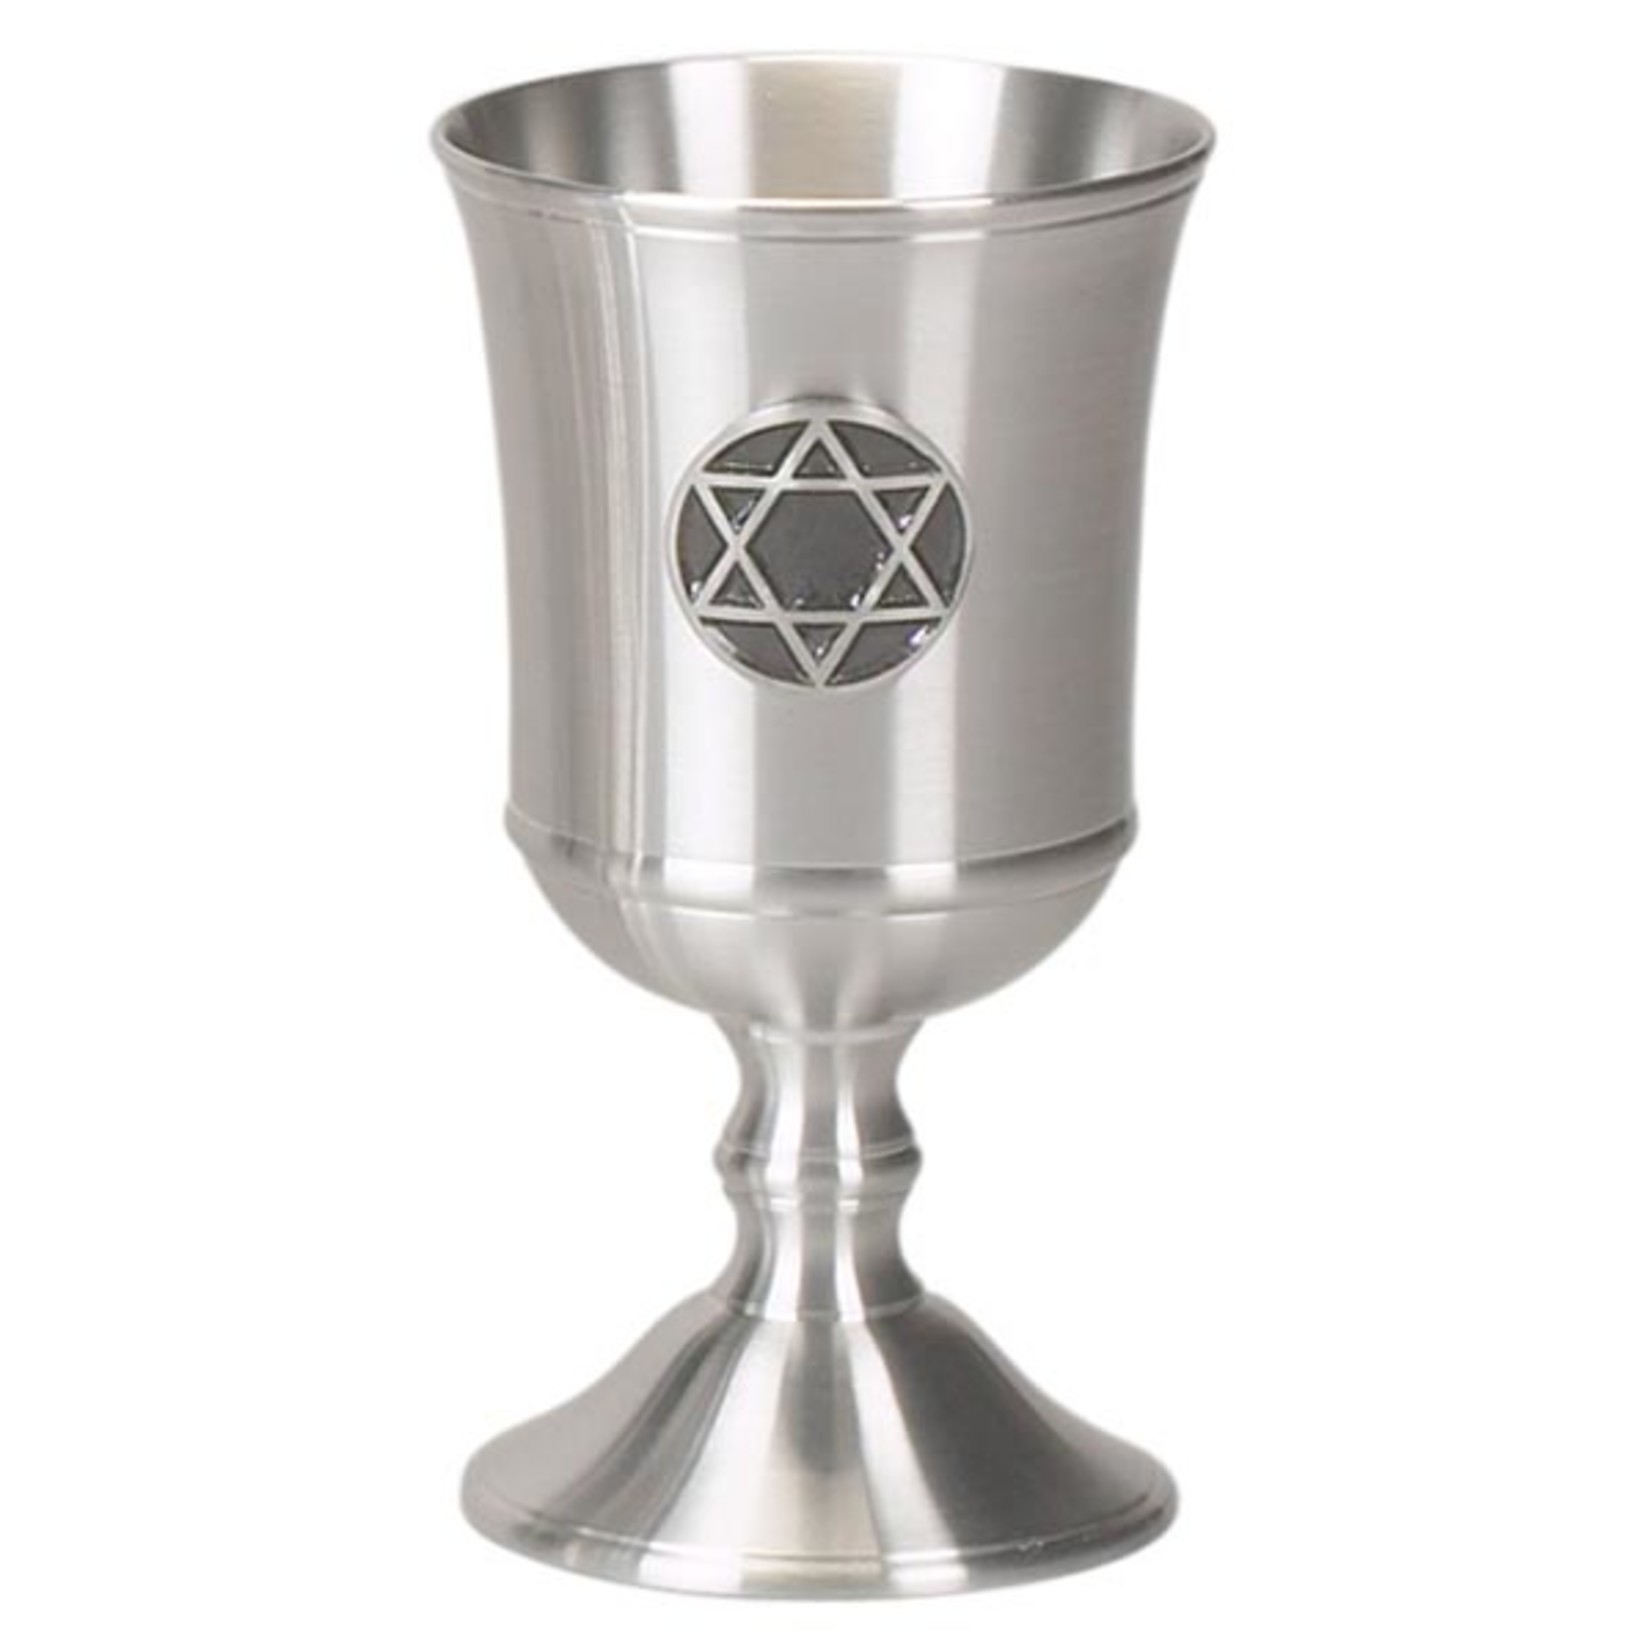 Pewter Kiddush Cup